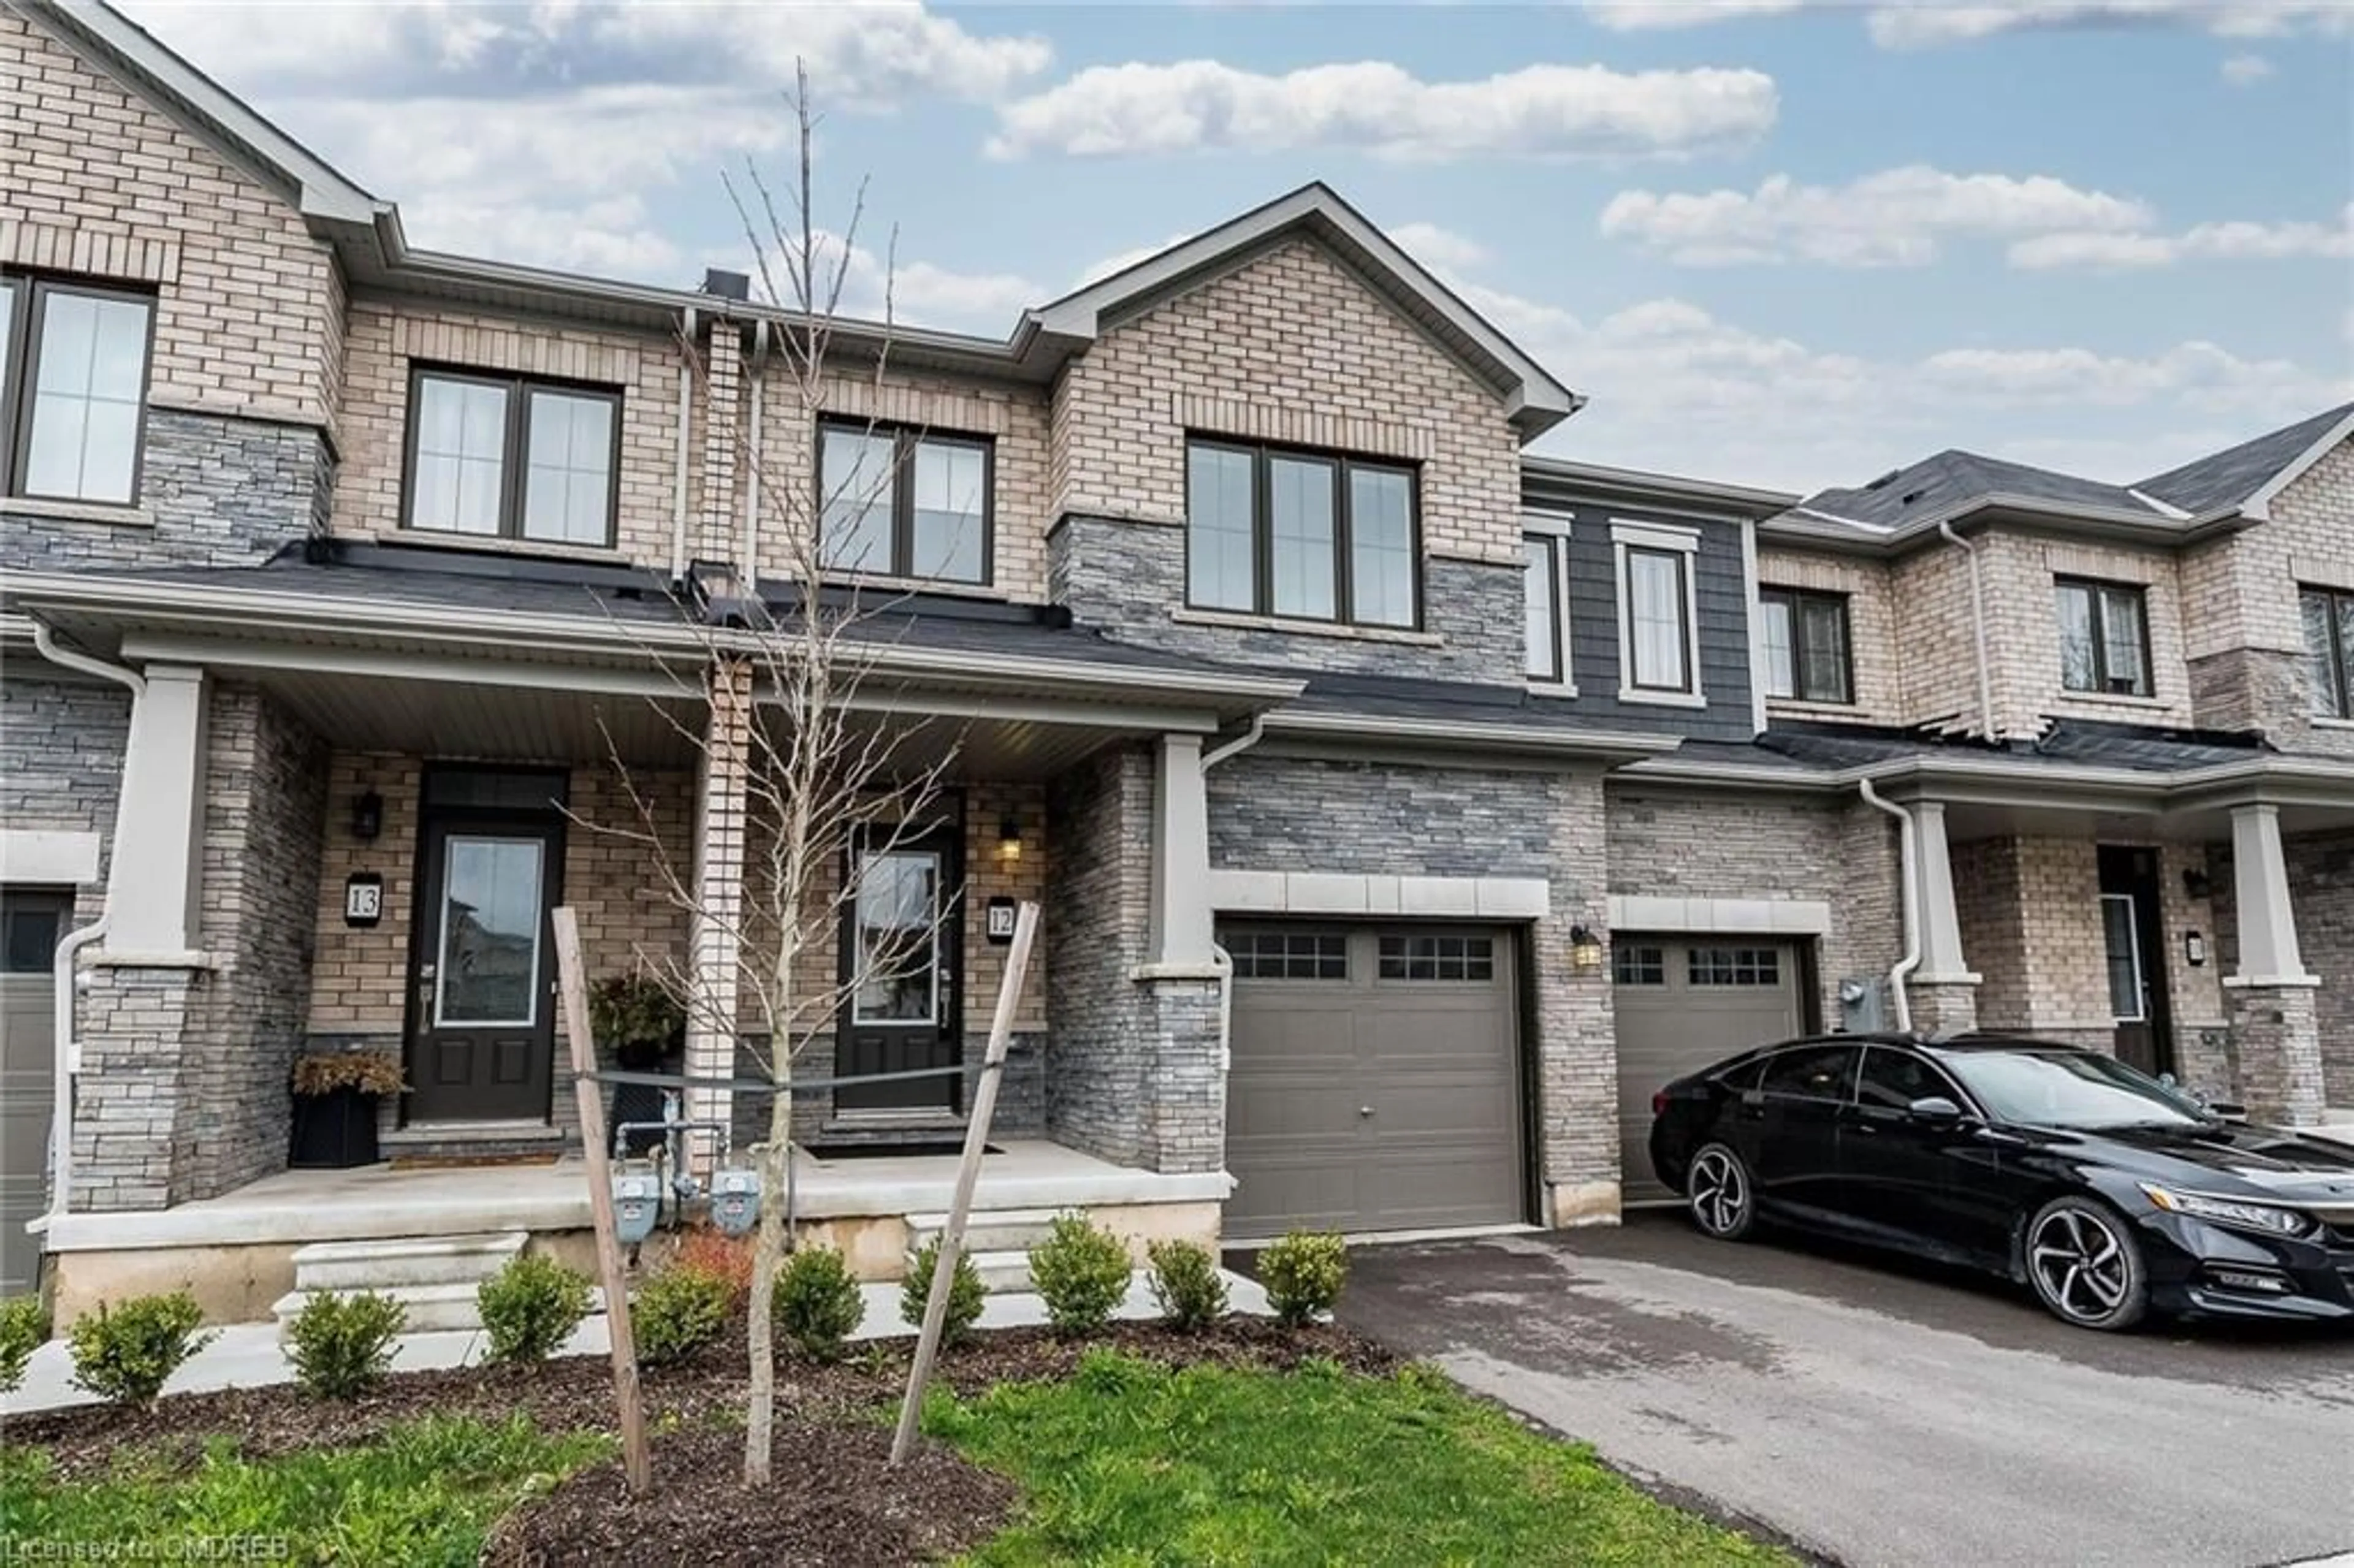 Home with brick exterior material for 8273 Tulip Tree Drive Dr #12, Niagara Falls Ontario L2H 3S8